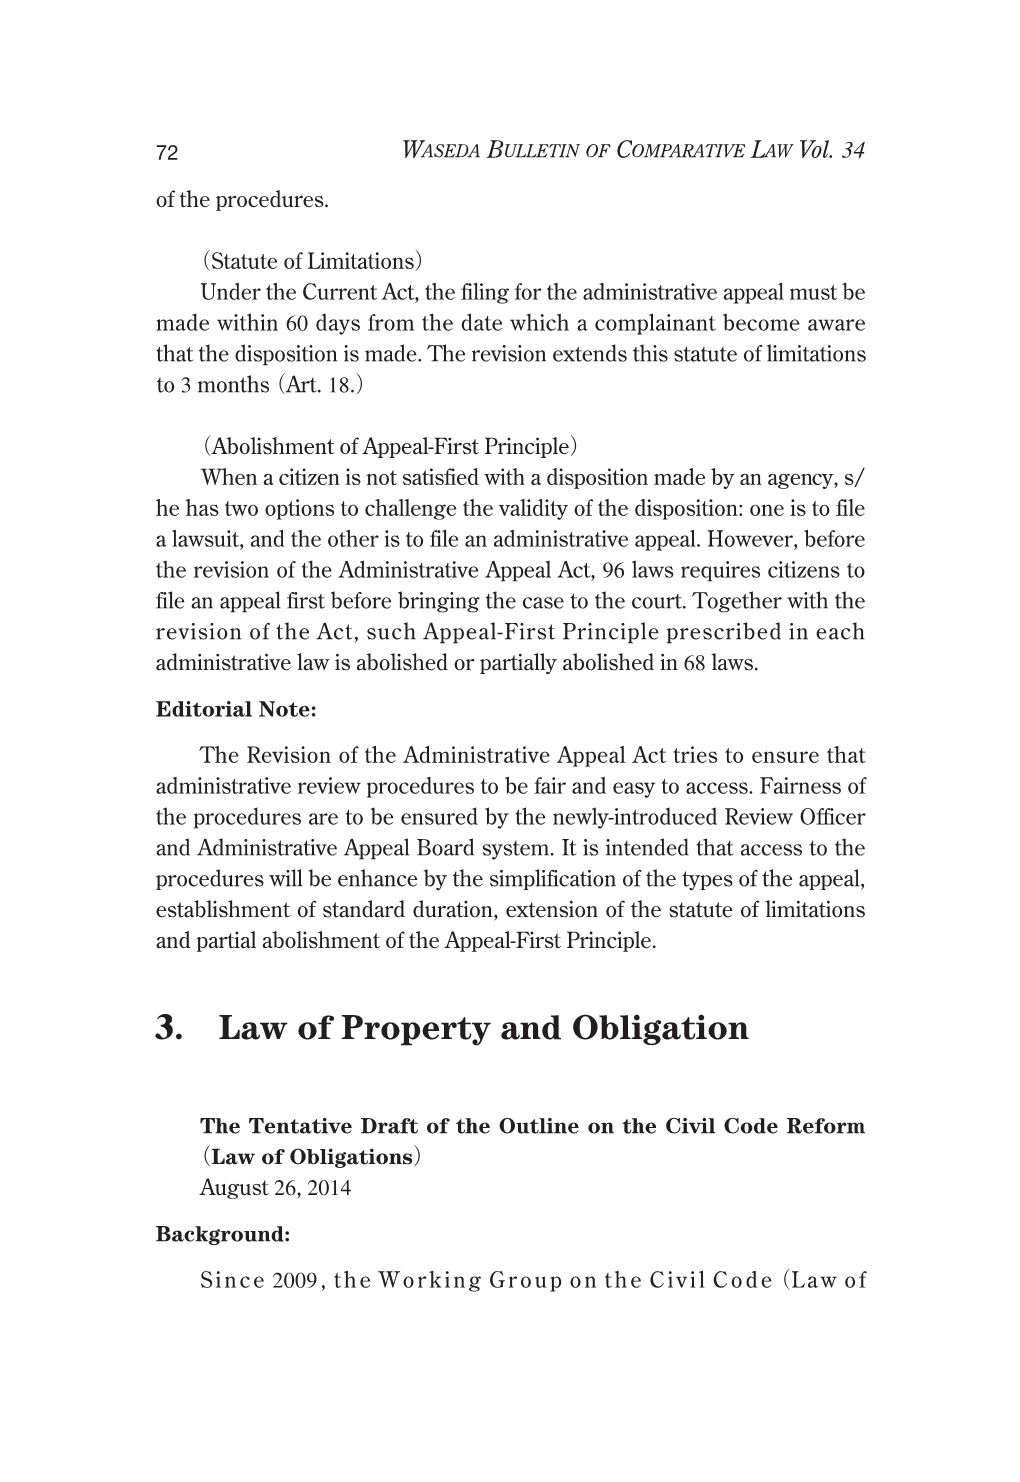 3. Law of Property and Obligation